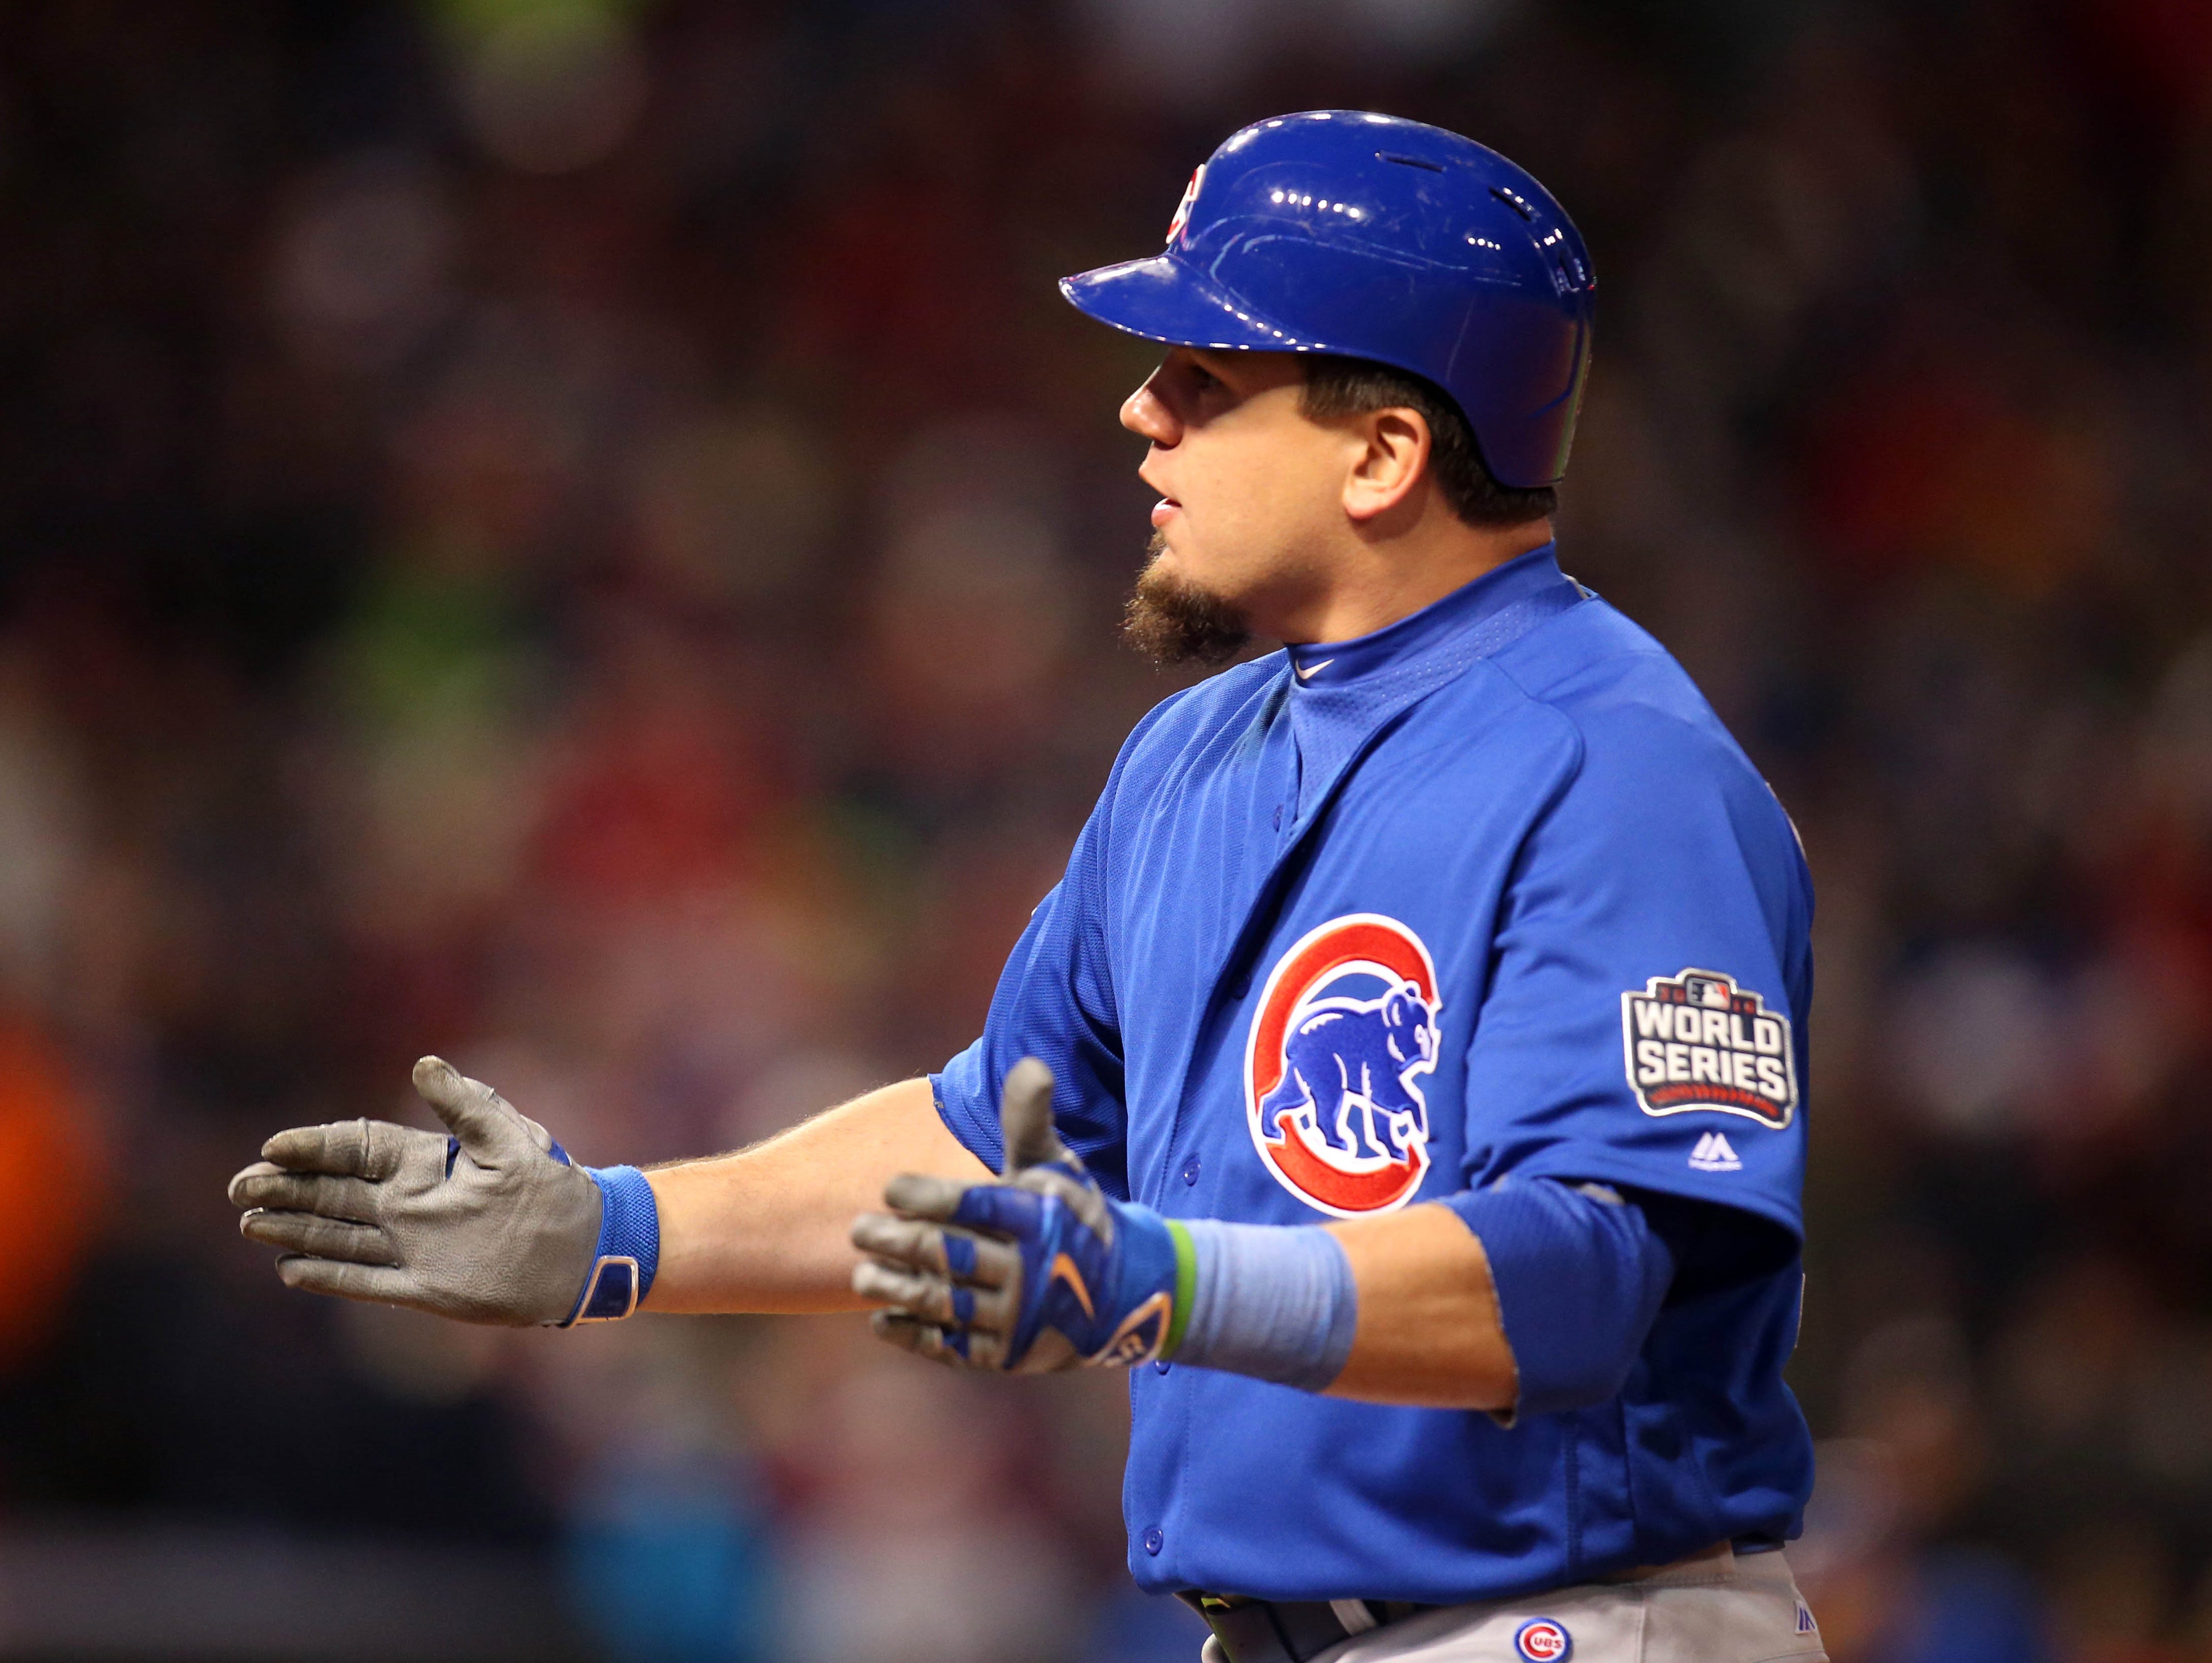 Chicago Cubs player Kyle Schwarber (12) reacts after hitting a RBI single against the Cleveland Indians in the third inning in game two of the 2016 World Series at Progressive Field.